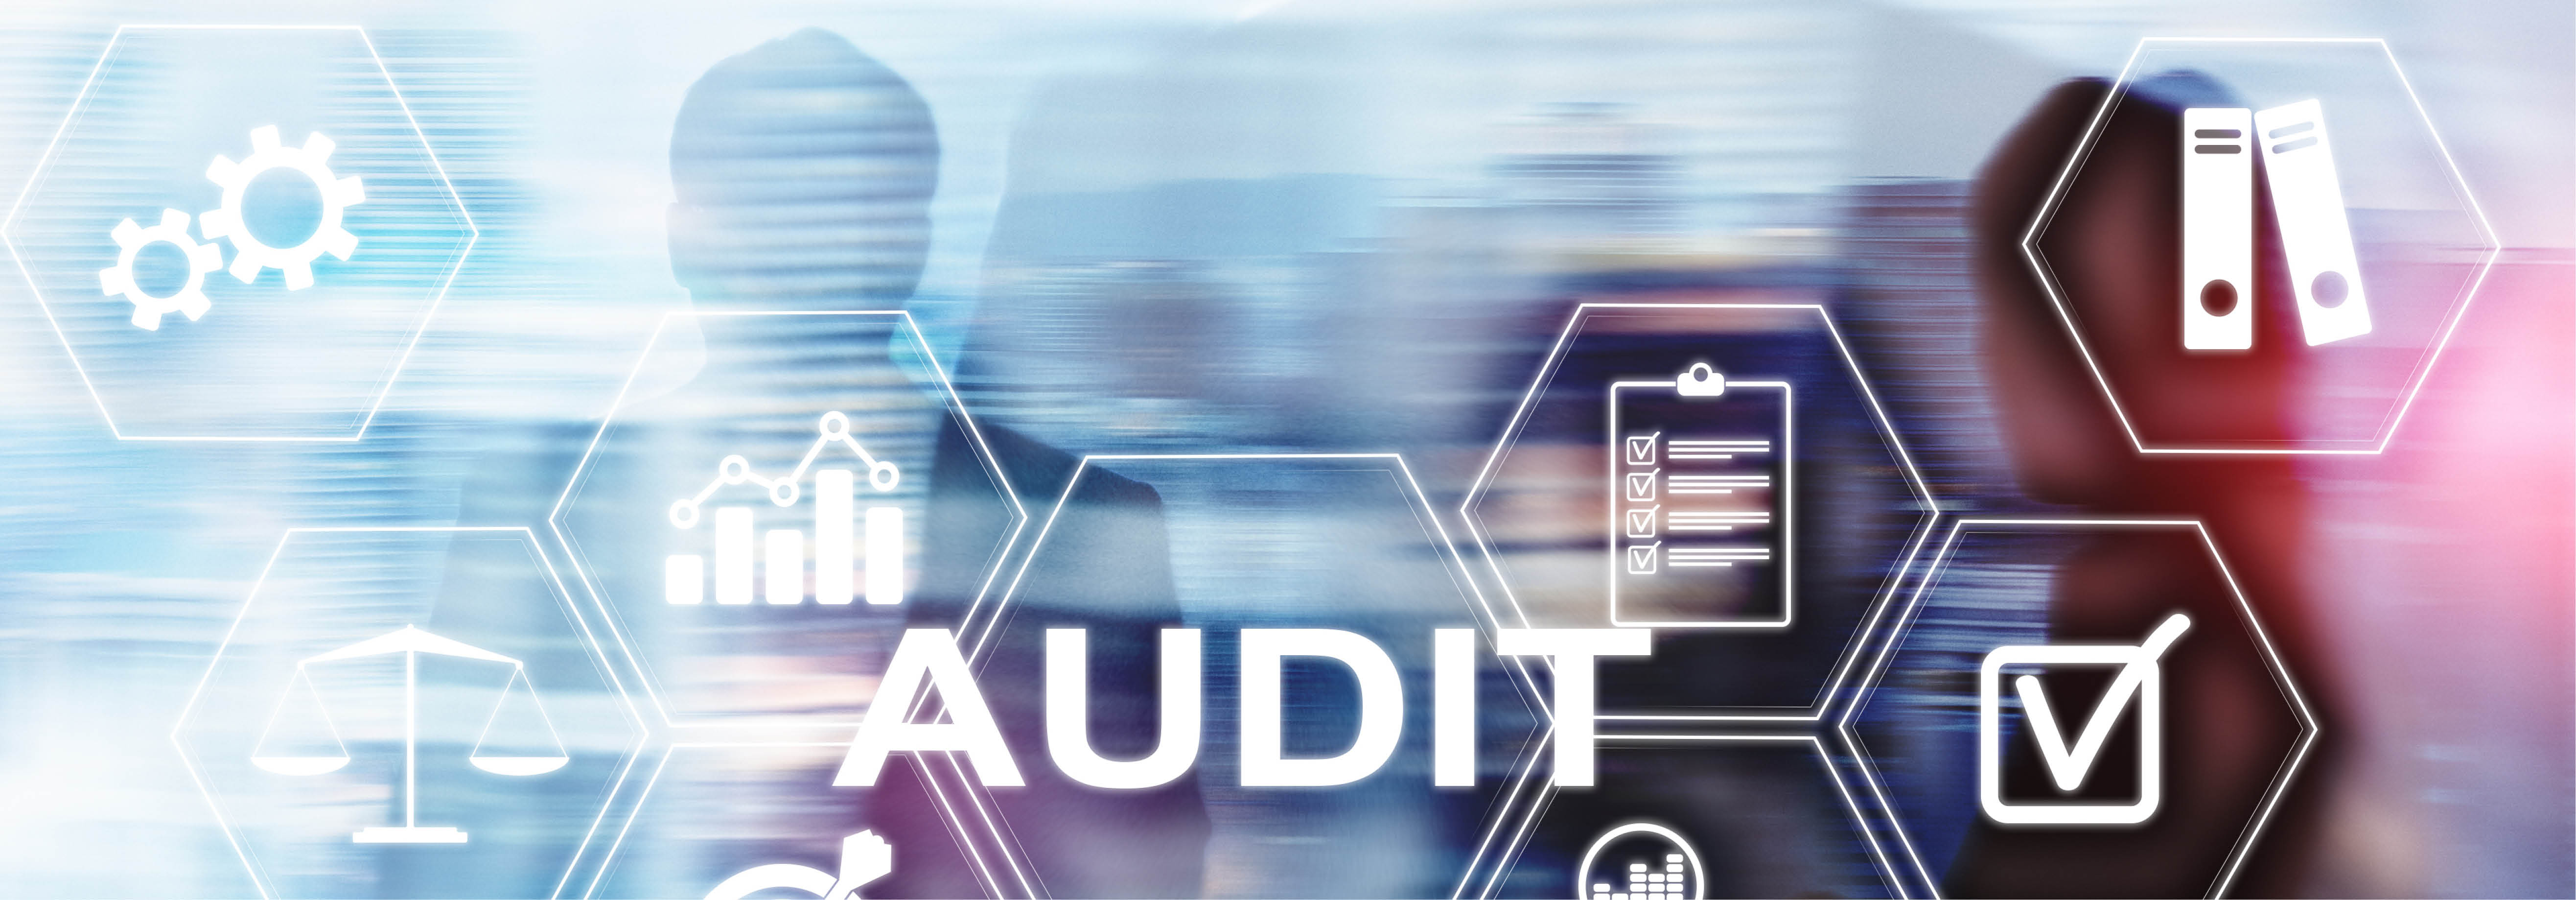 Audit & Accounting Group - Inventory Checks & Digitalization of Audit Tools